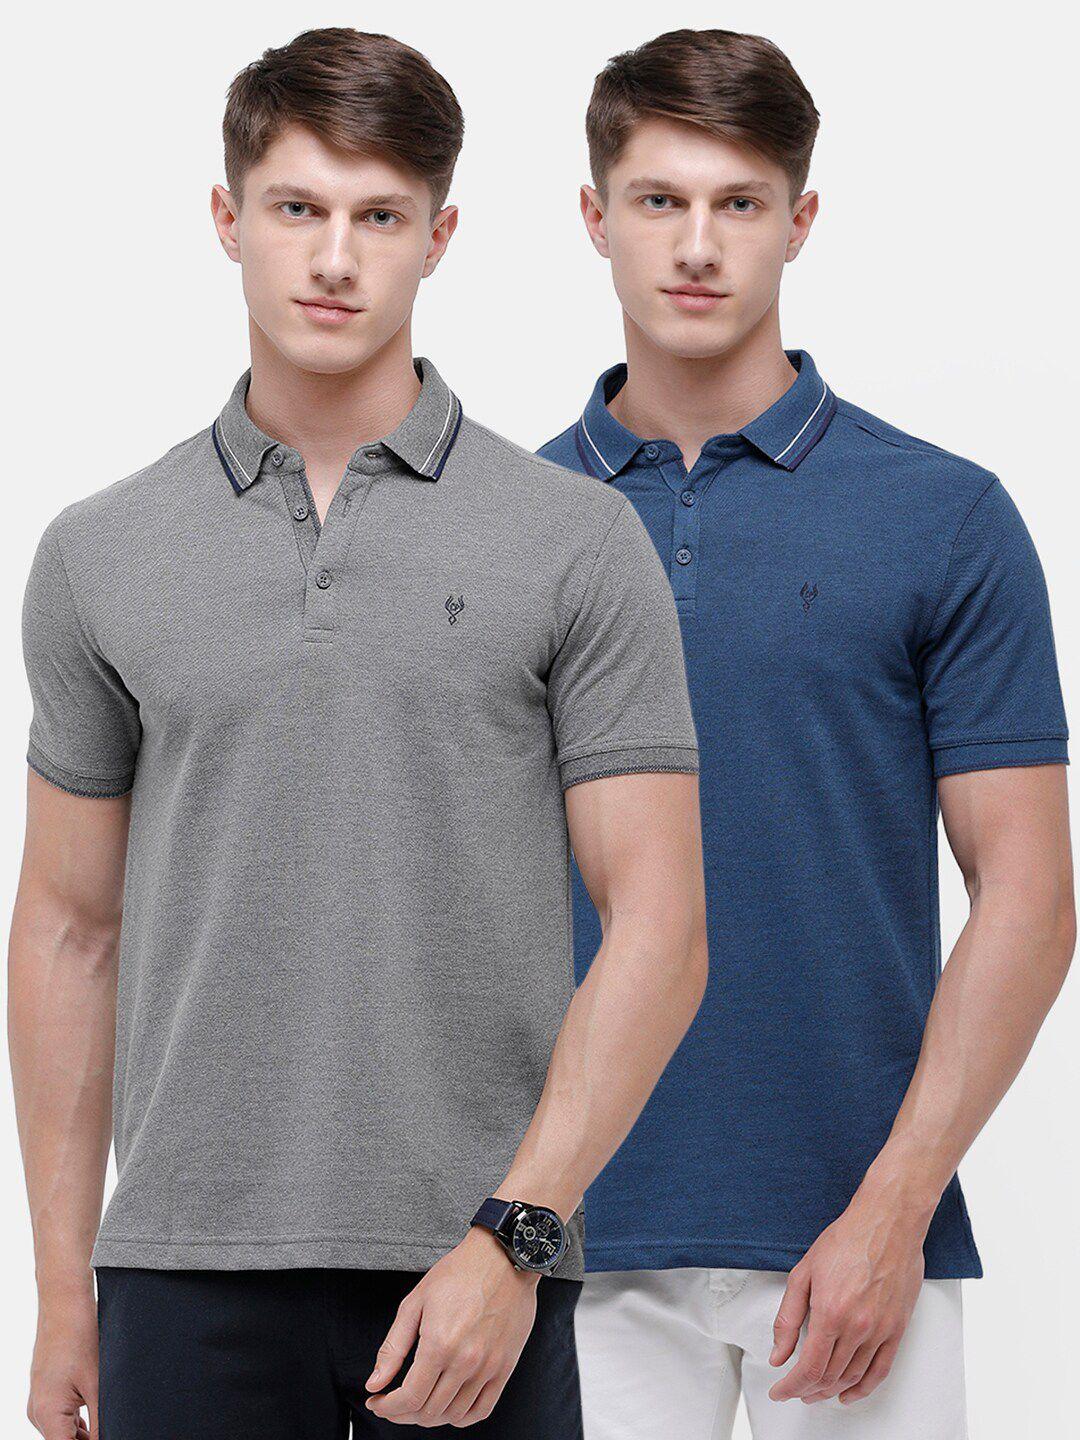 classic polo men charcoal & blue 2 polo collar slim fit t-shirt